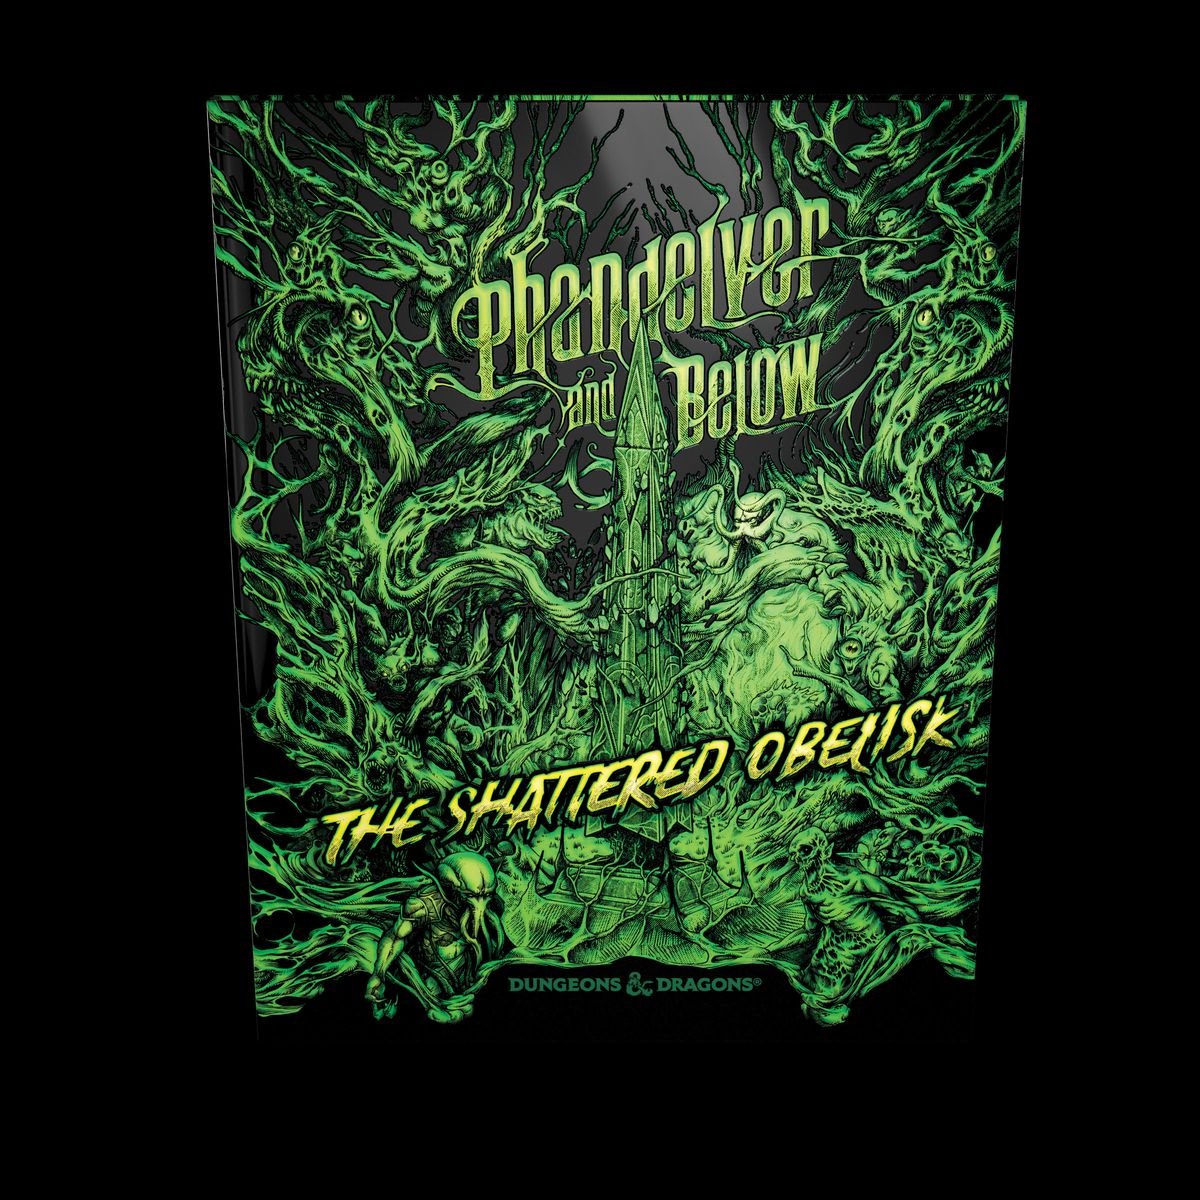 A bright, shiny green covers with a black background. The details show The Shattered Obelisk itself, plus many other elements of the Phandelver and Below adventure for D&D’s 5th edition.